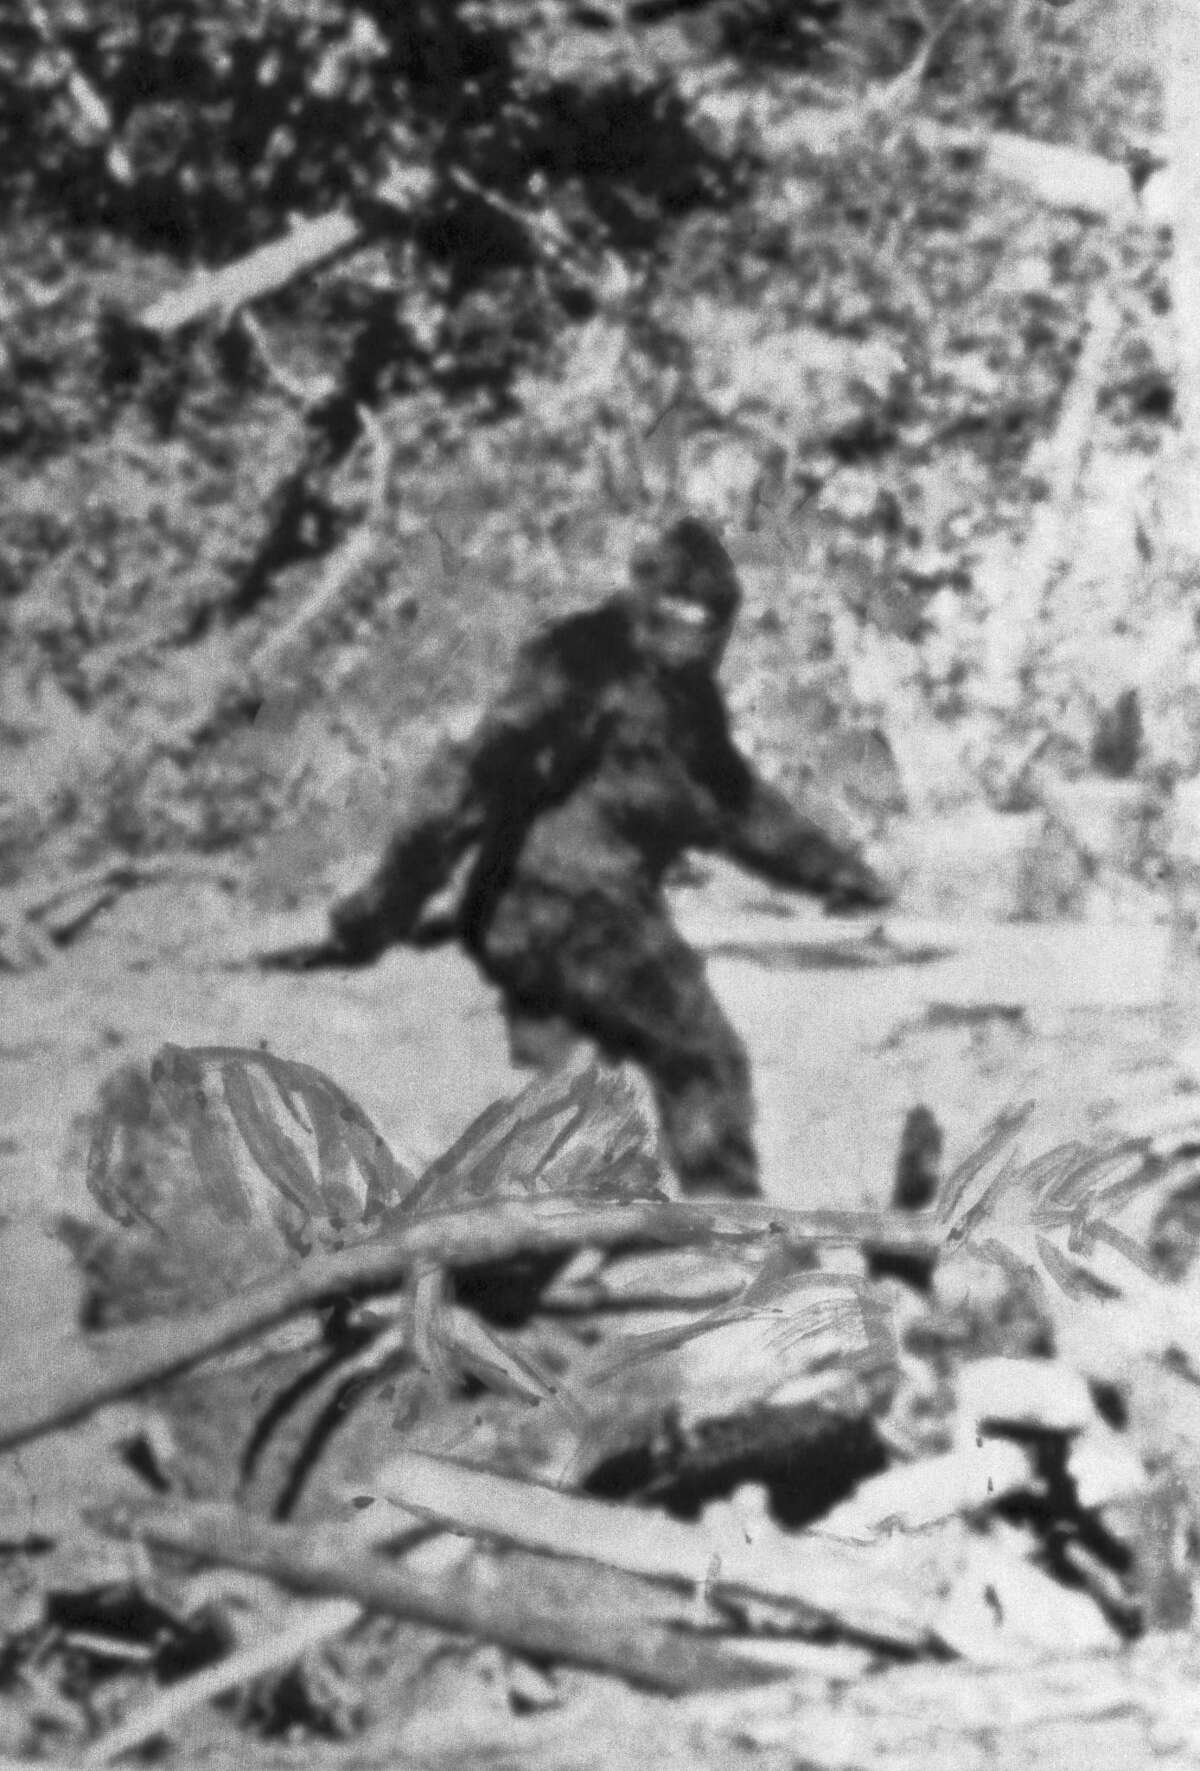 An image taken from film footage by Roger Patterson and Robert "'Bob" Gimlin reports to show a Bigfoot sighted in 1967 in Northern California. They estimated the creature was 7.5 feet tall.